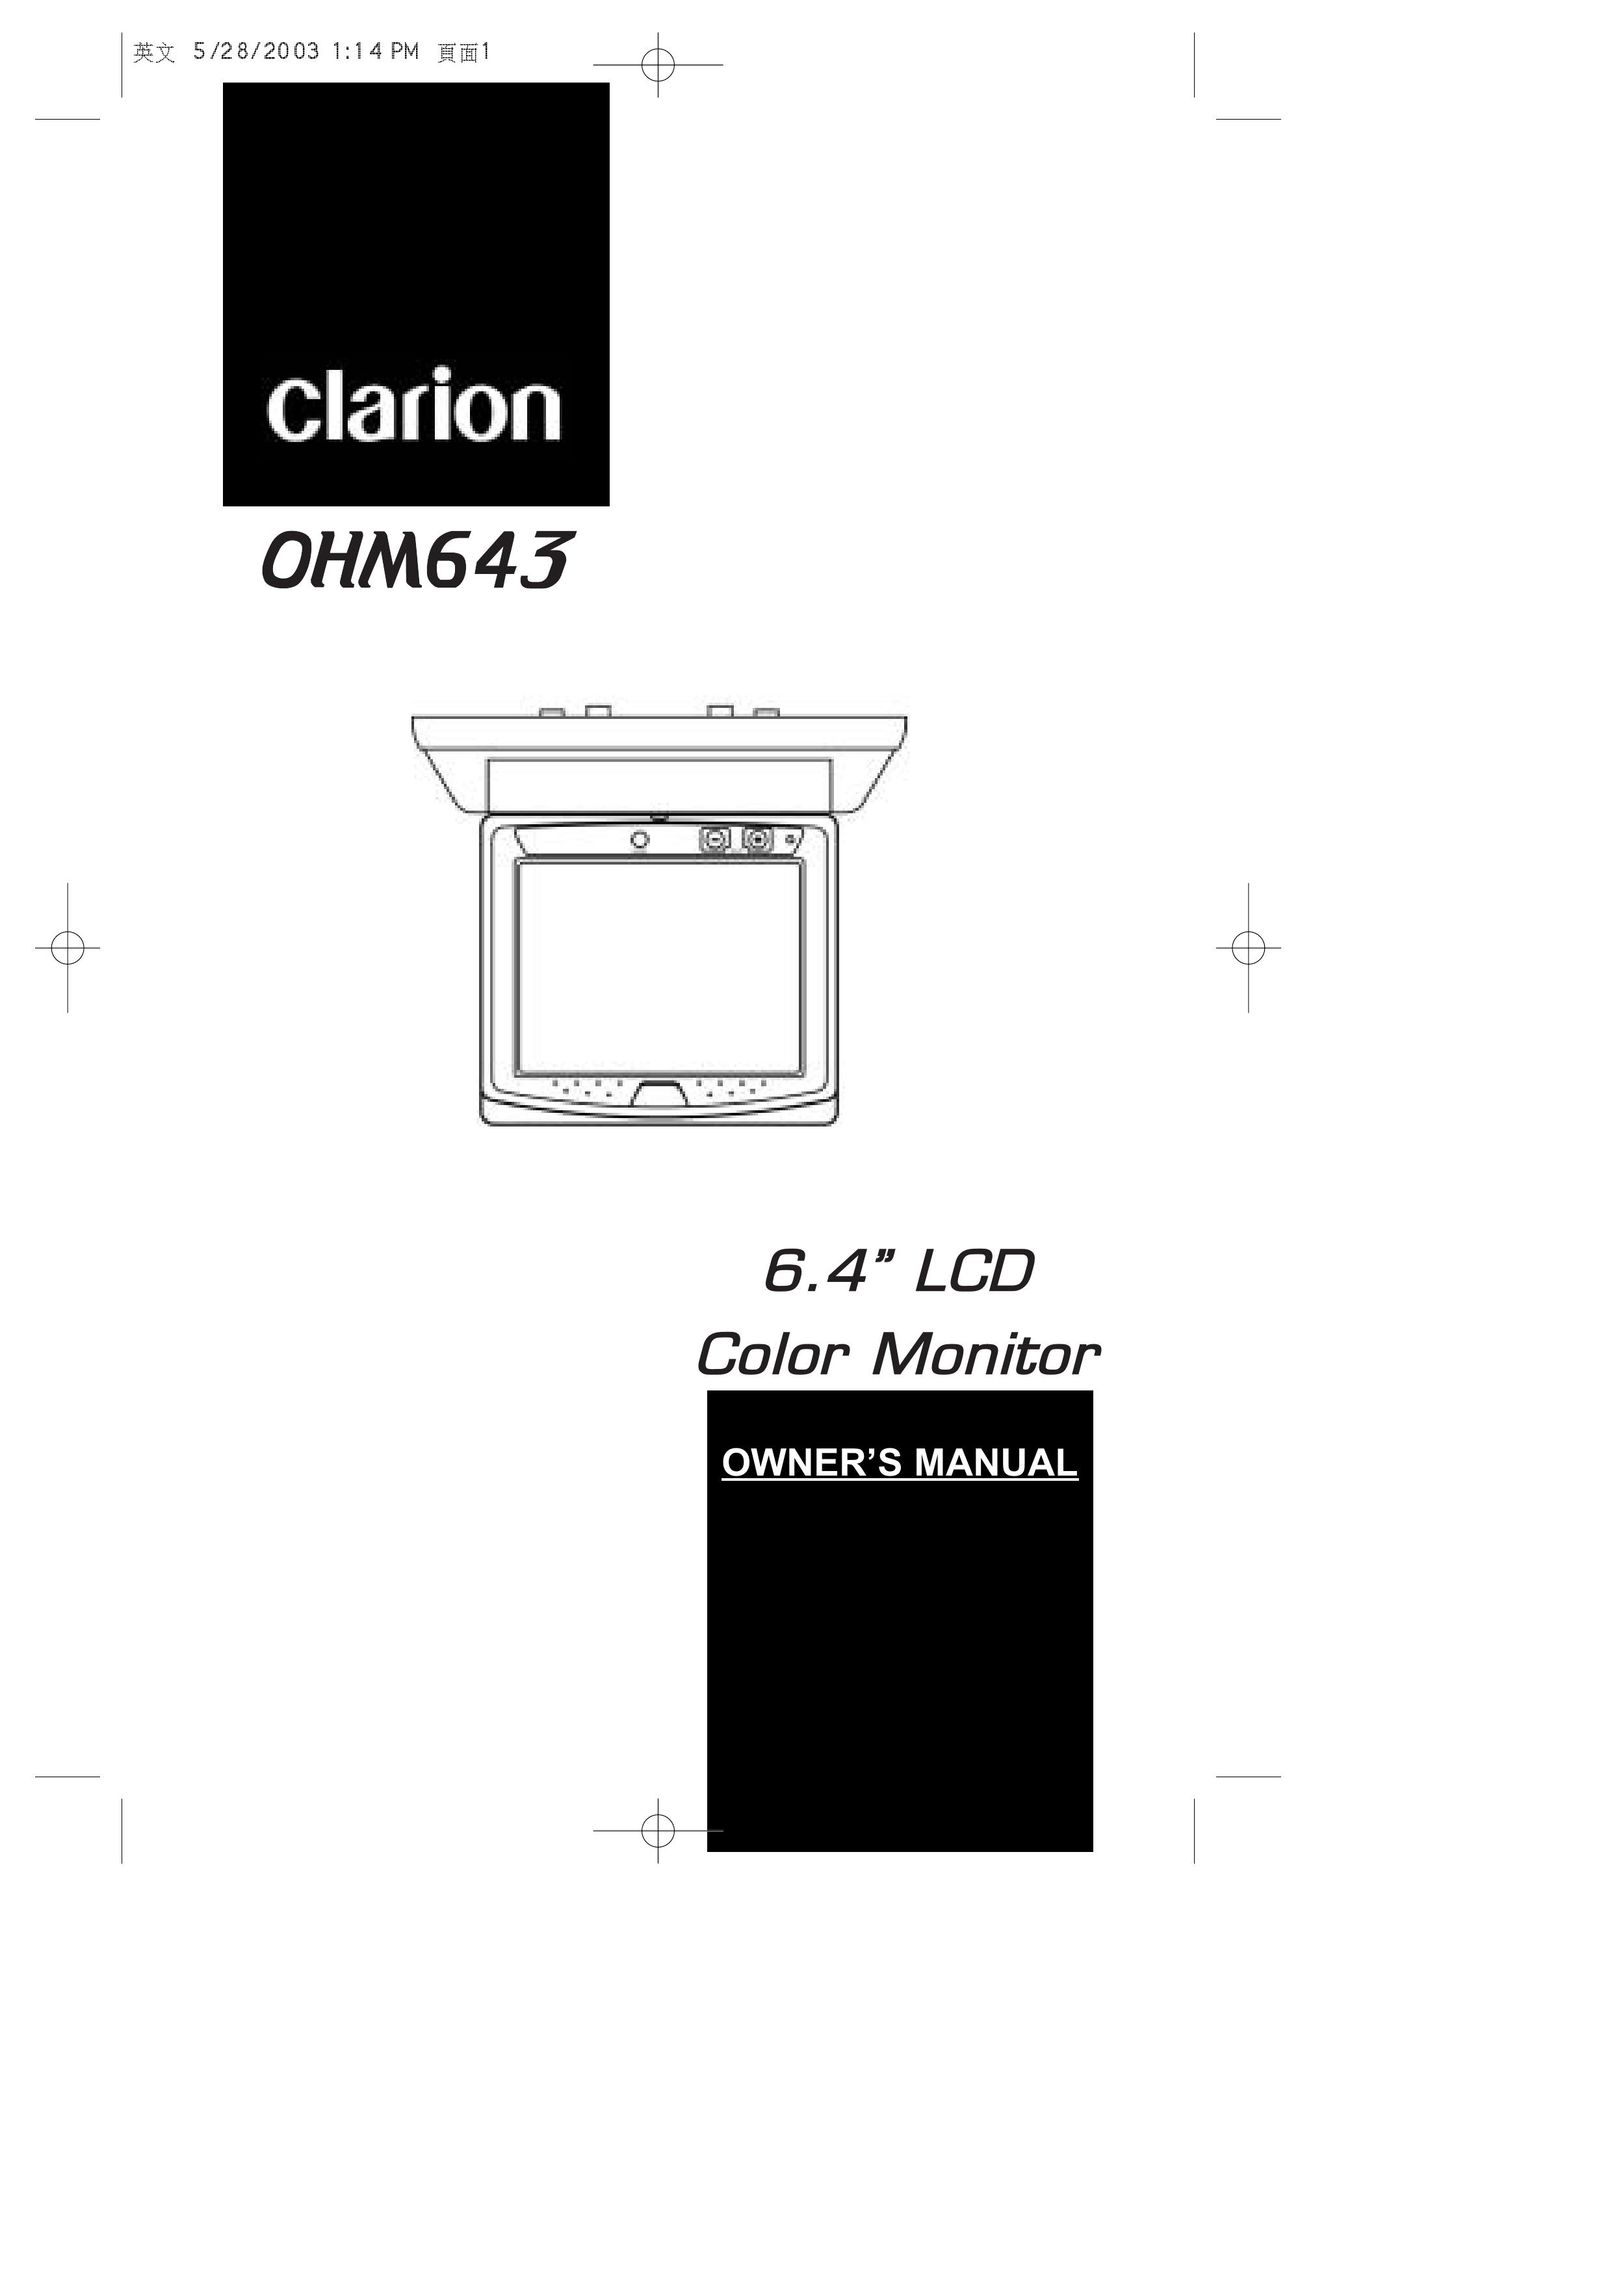 Clarion OHM643 Computer Monitor User Manual